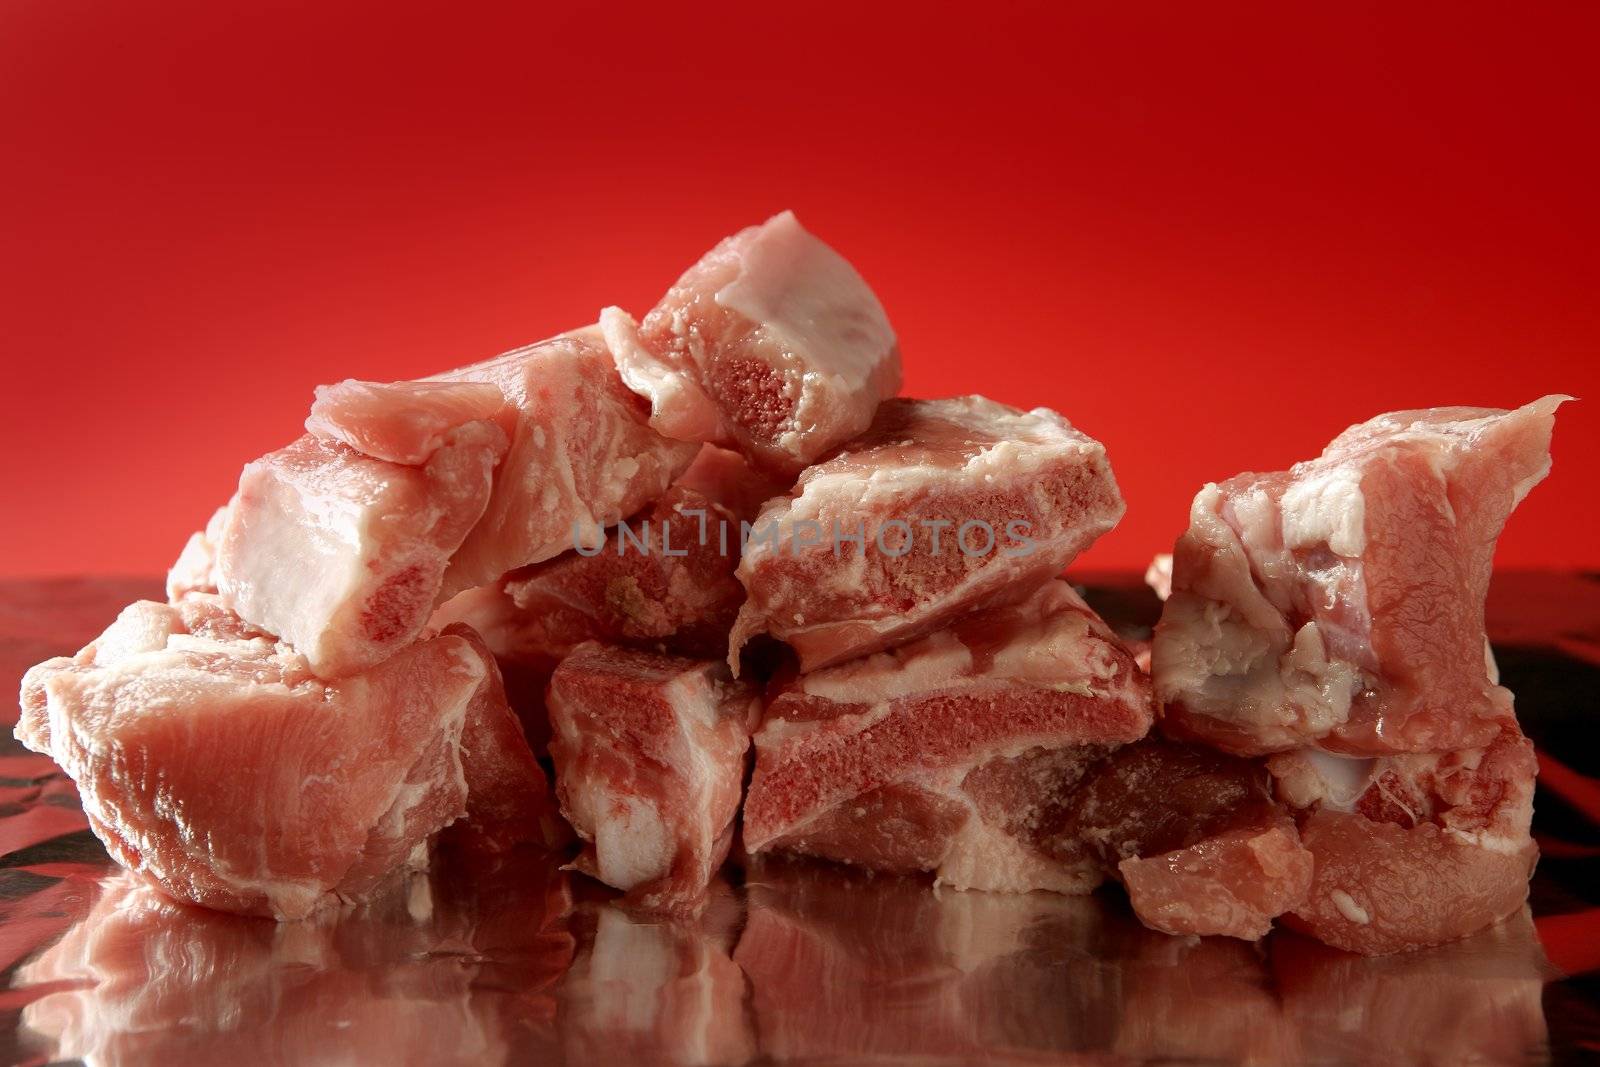 Pig, pork raw meat pieces over red background